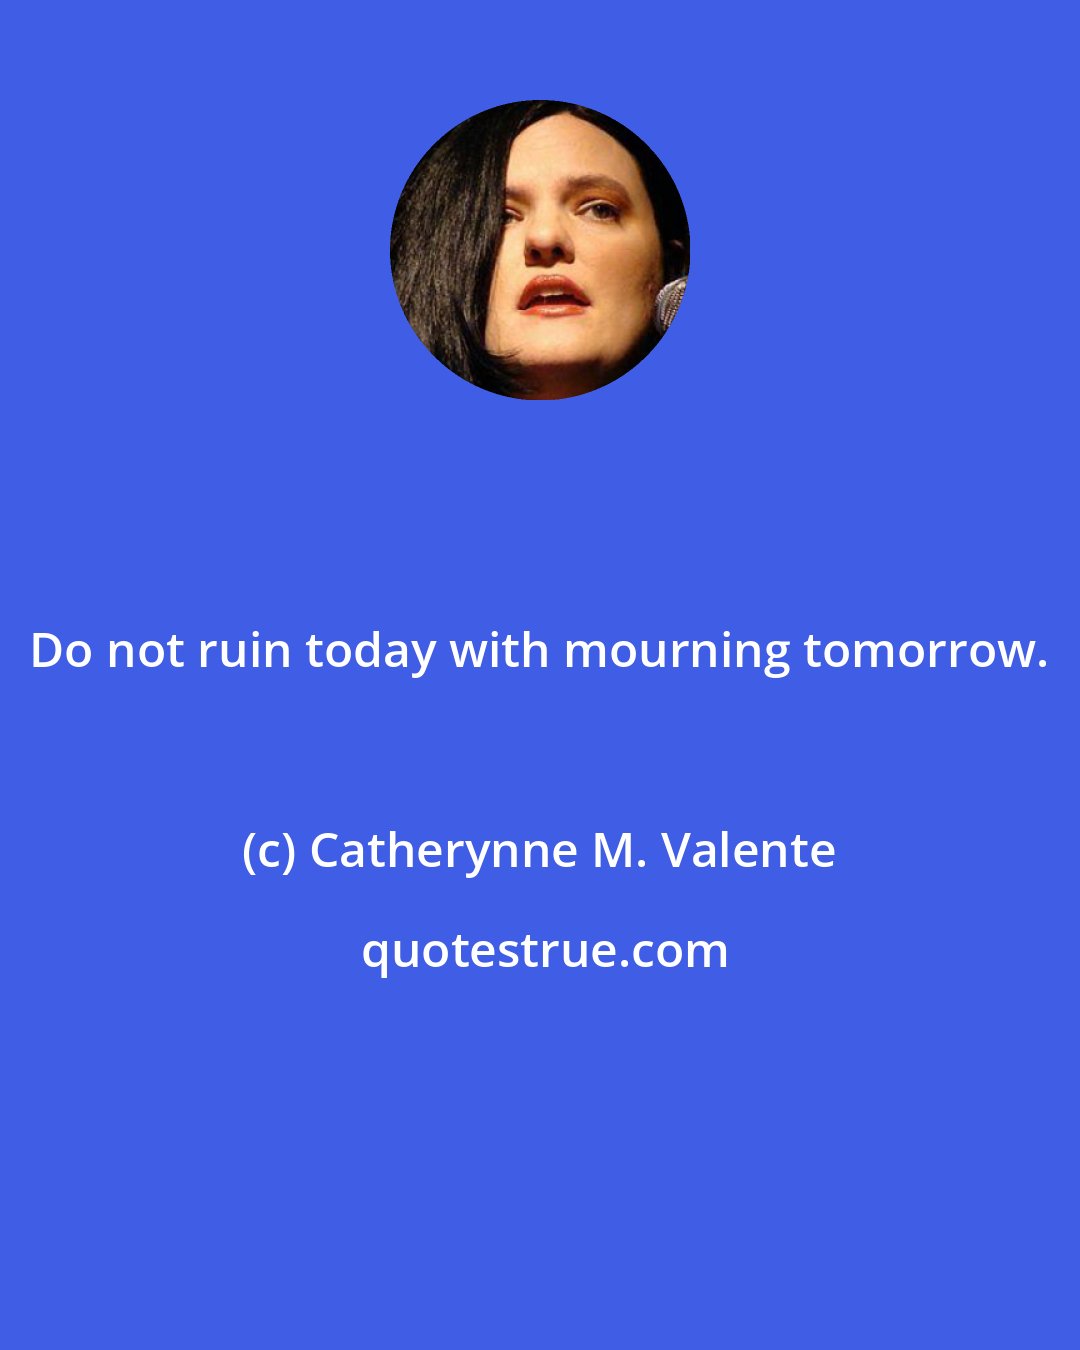 Catherynne M. Valente: Do not ruin today with mourning tomorrow.